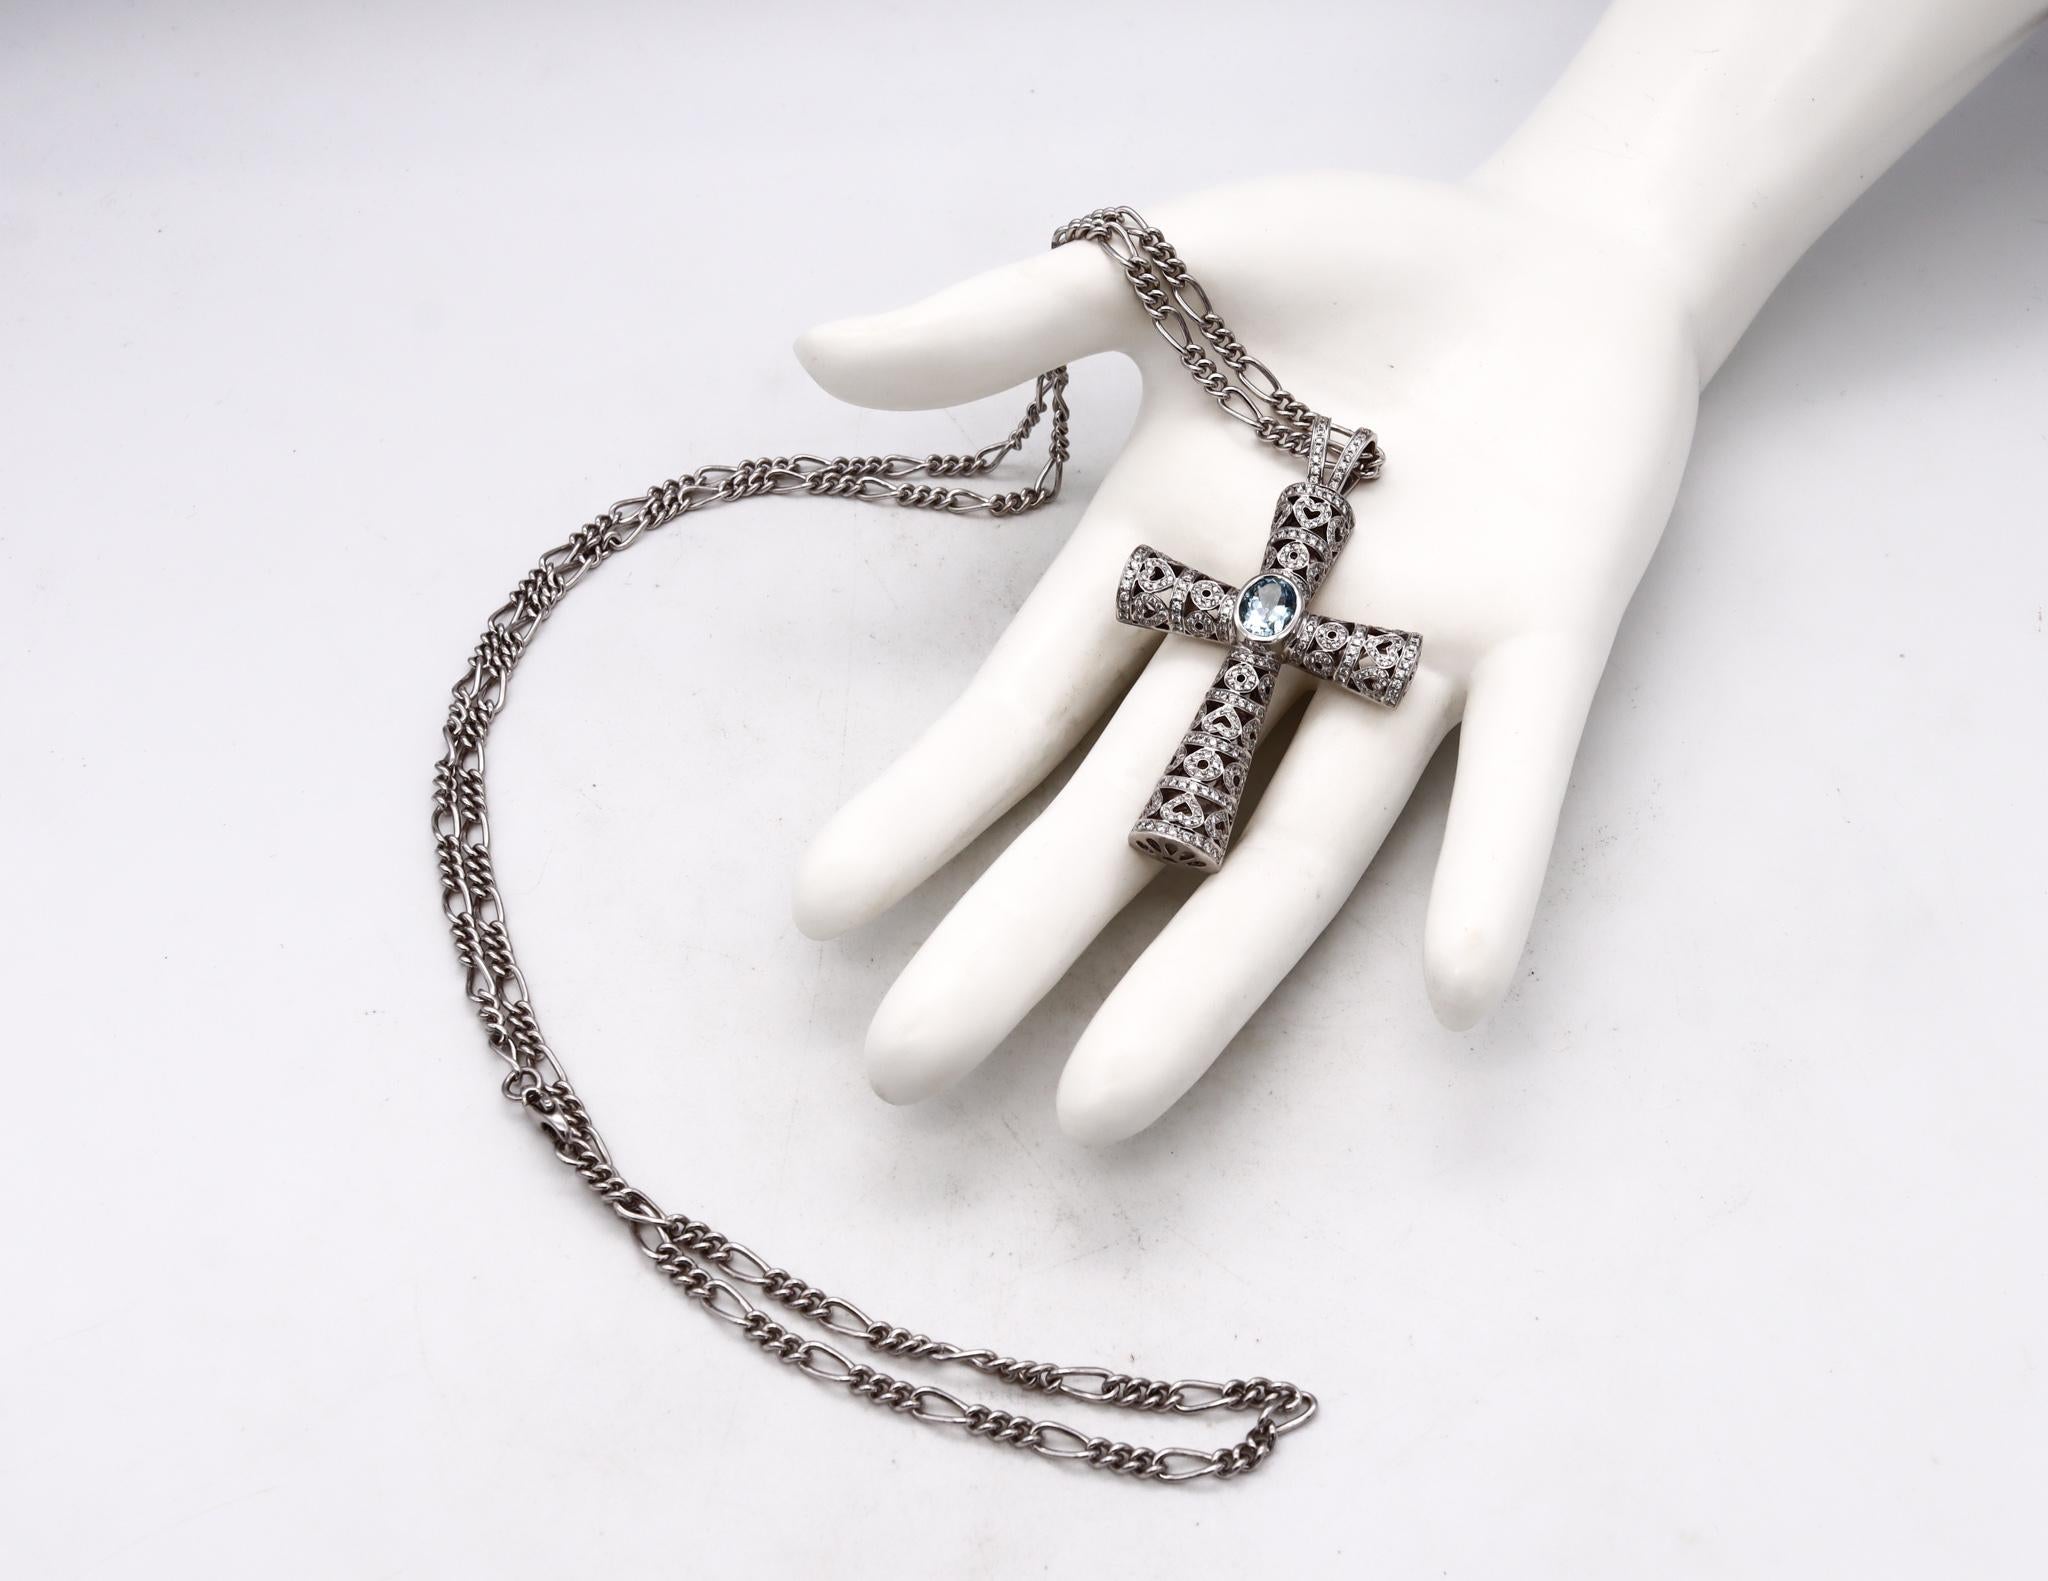 A chain and a cross designed by Theo Fennel.

Modern pieces created by the British goldsmith Theo Fennell. This suite has been crafted in solid white gold of 18 karats and finished with very high polished surfaces.

Mount in the center into a bezel,